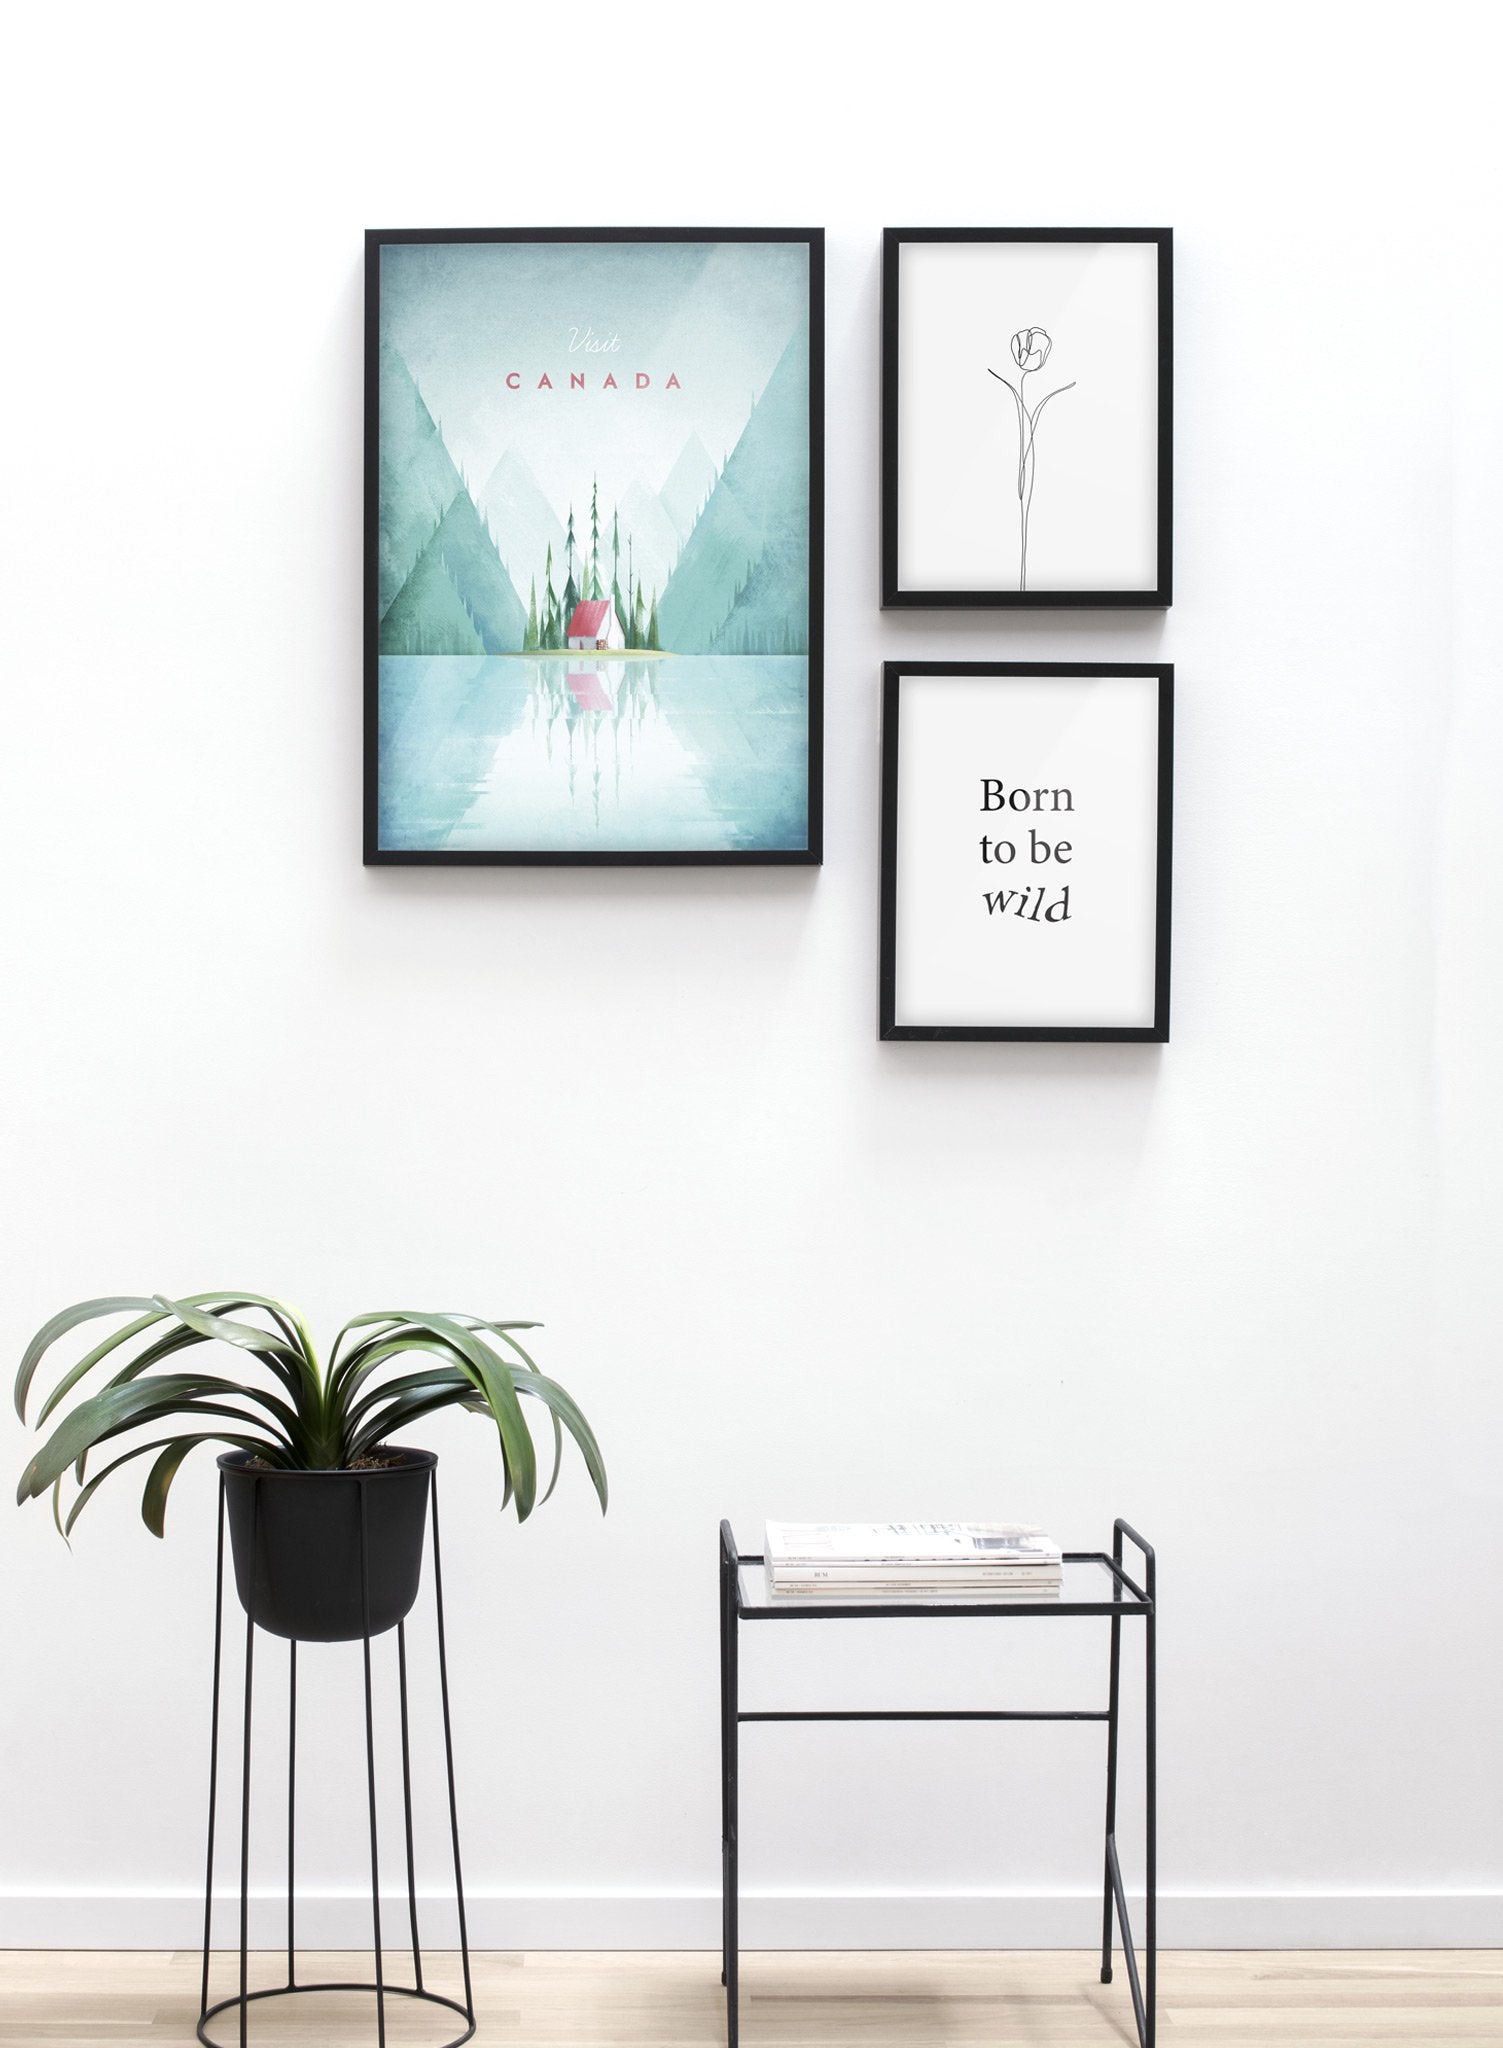 Modern minimalist poster by Opposite Wall with poster trio of illustration of Canada - Entryway